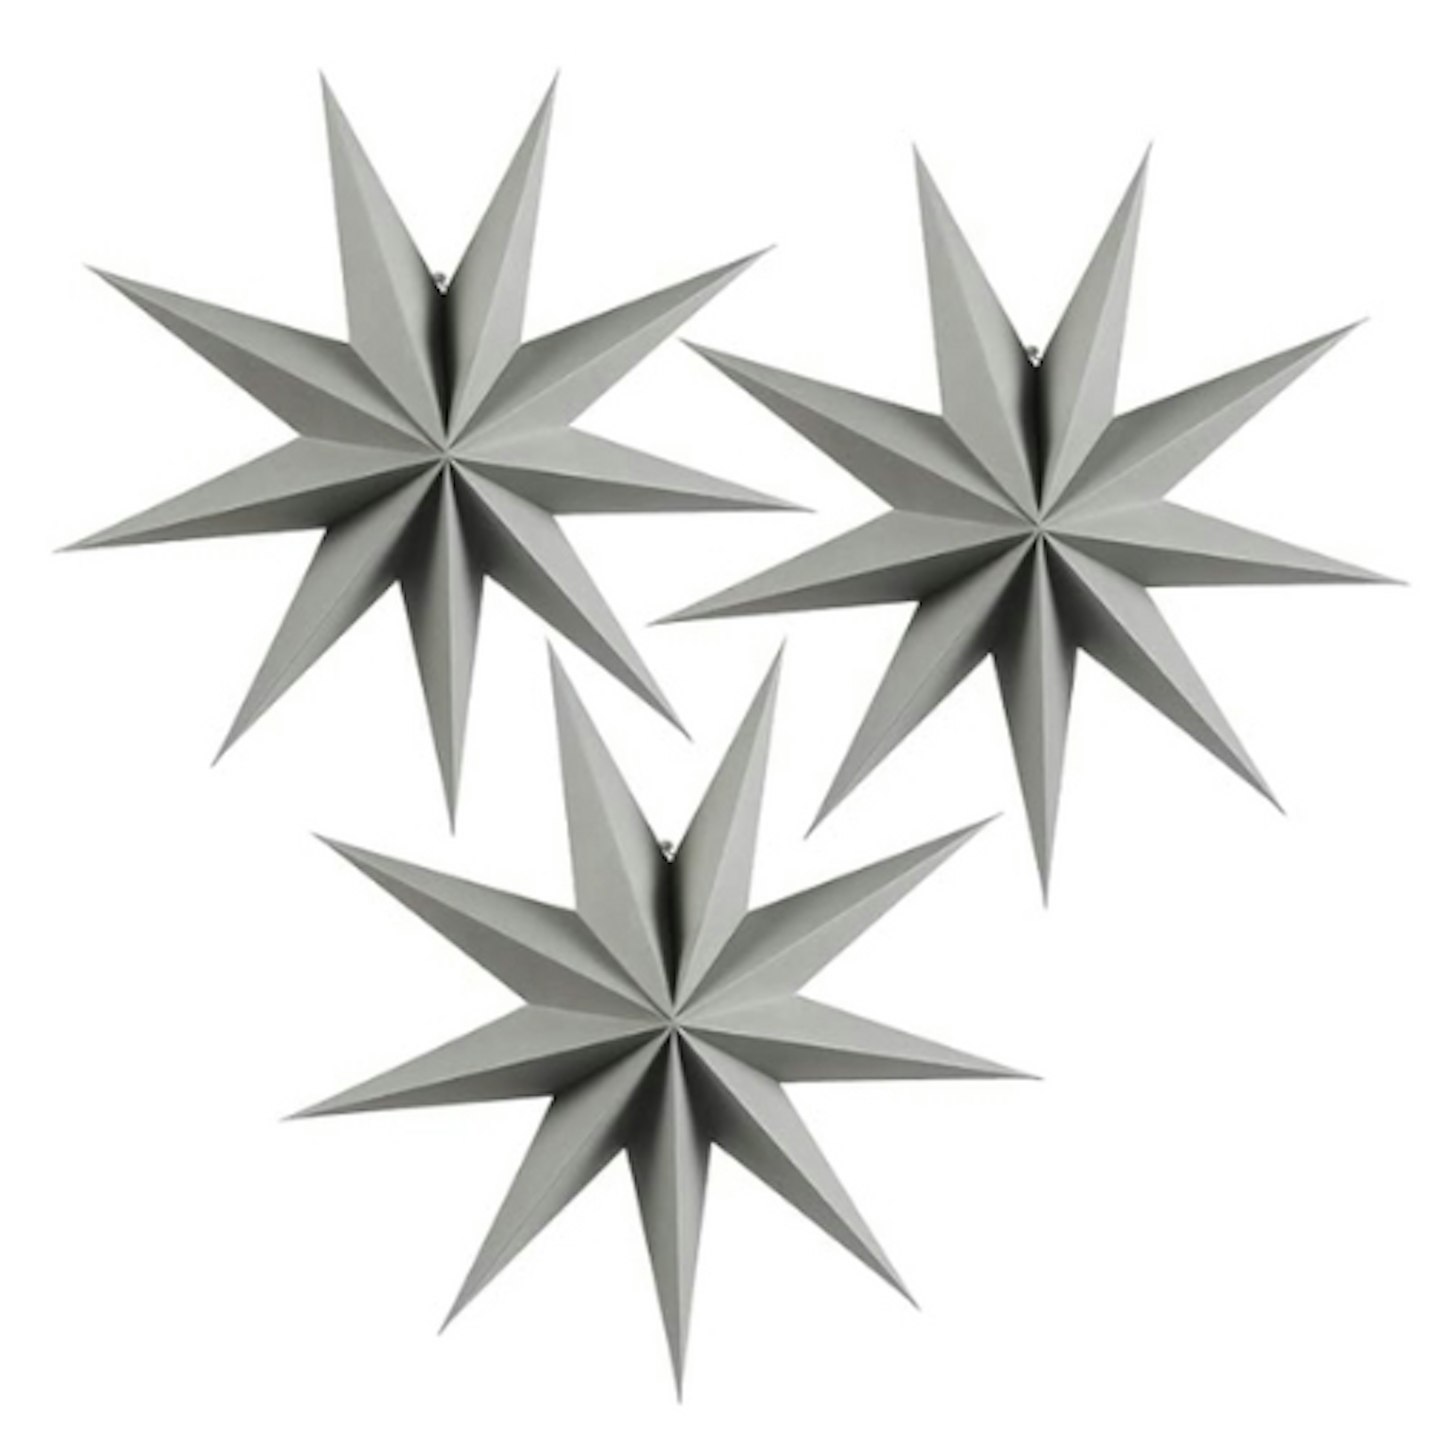 EASY JOY 9-Pointed Paper Star 3D Hanging Christmas Star Decorations